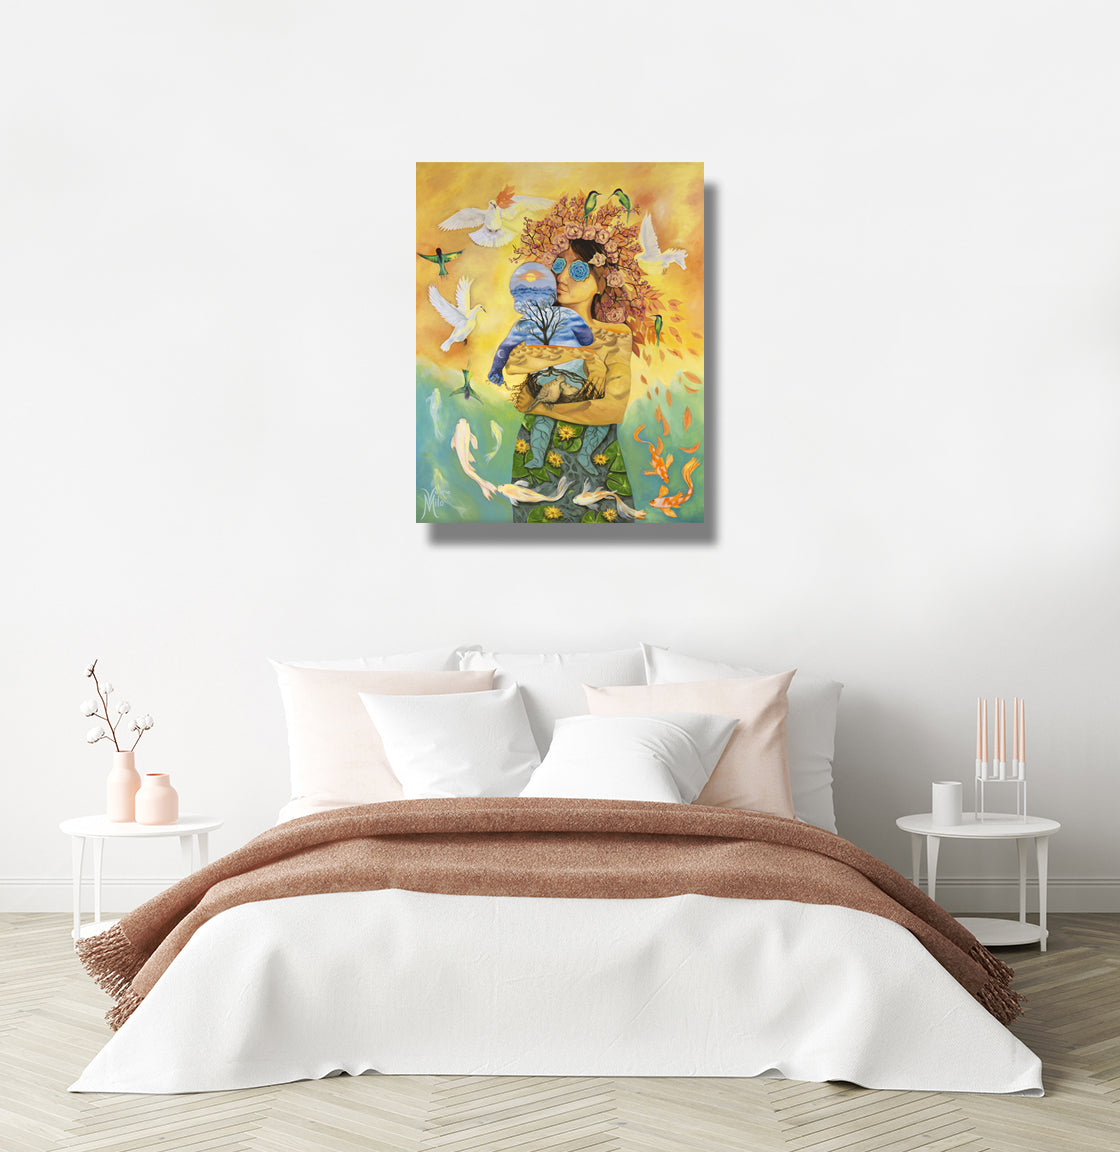 WING Canvas Prints